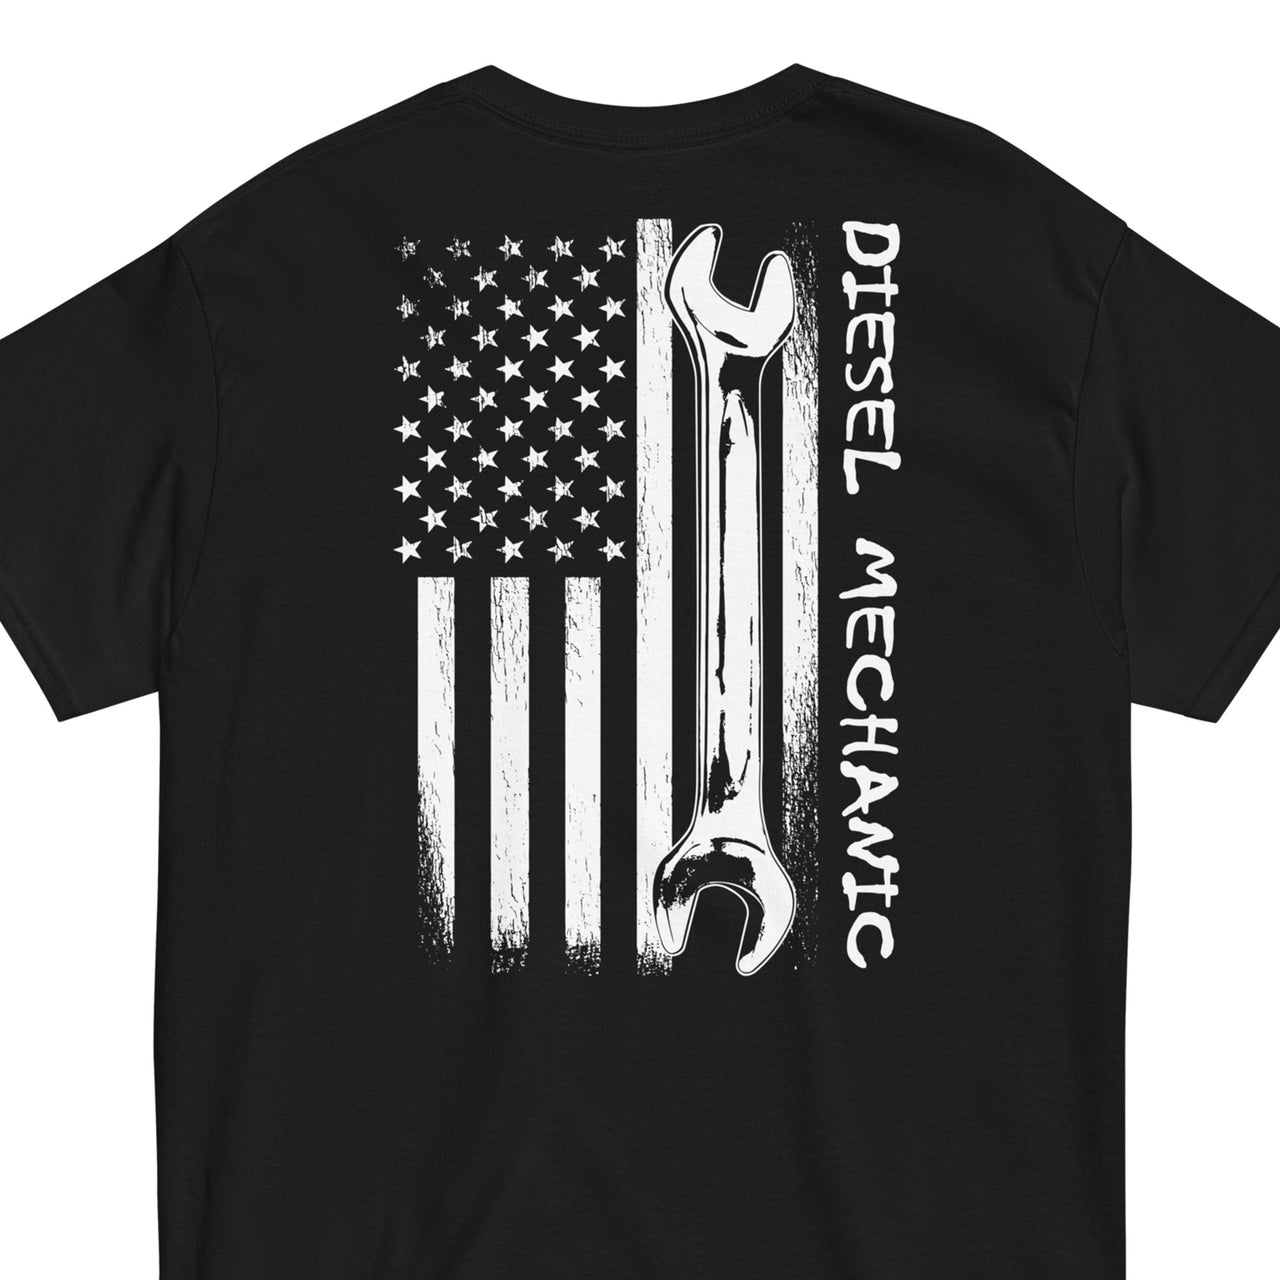 Diesel Mechanic American Flag T-Shirt in black - back view close up